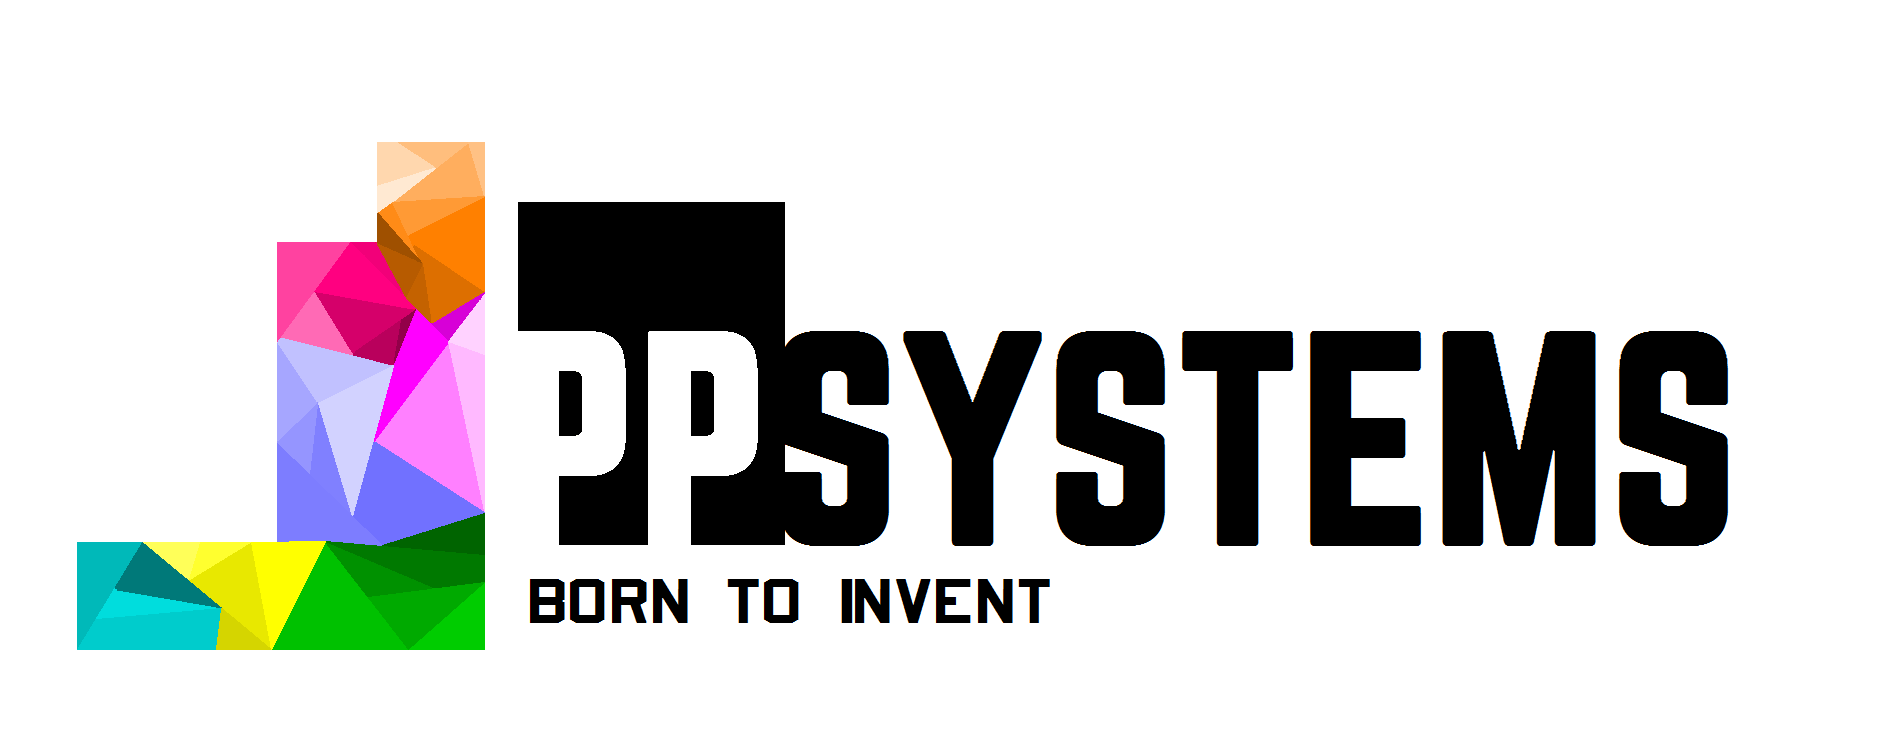 PPSystems AB